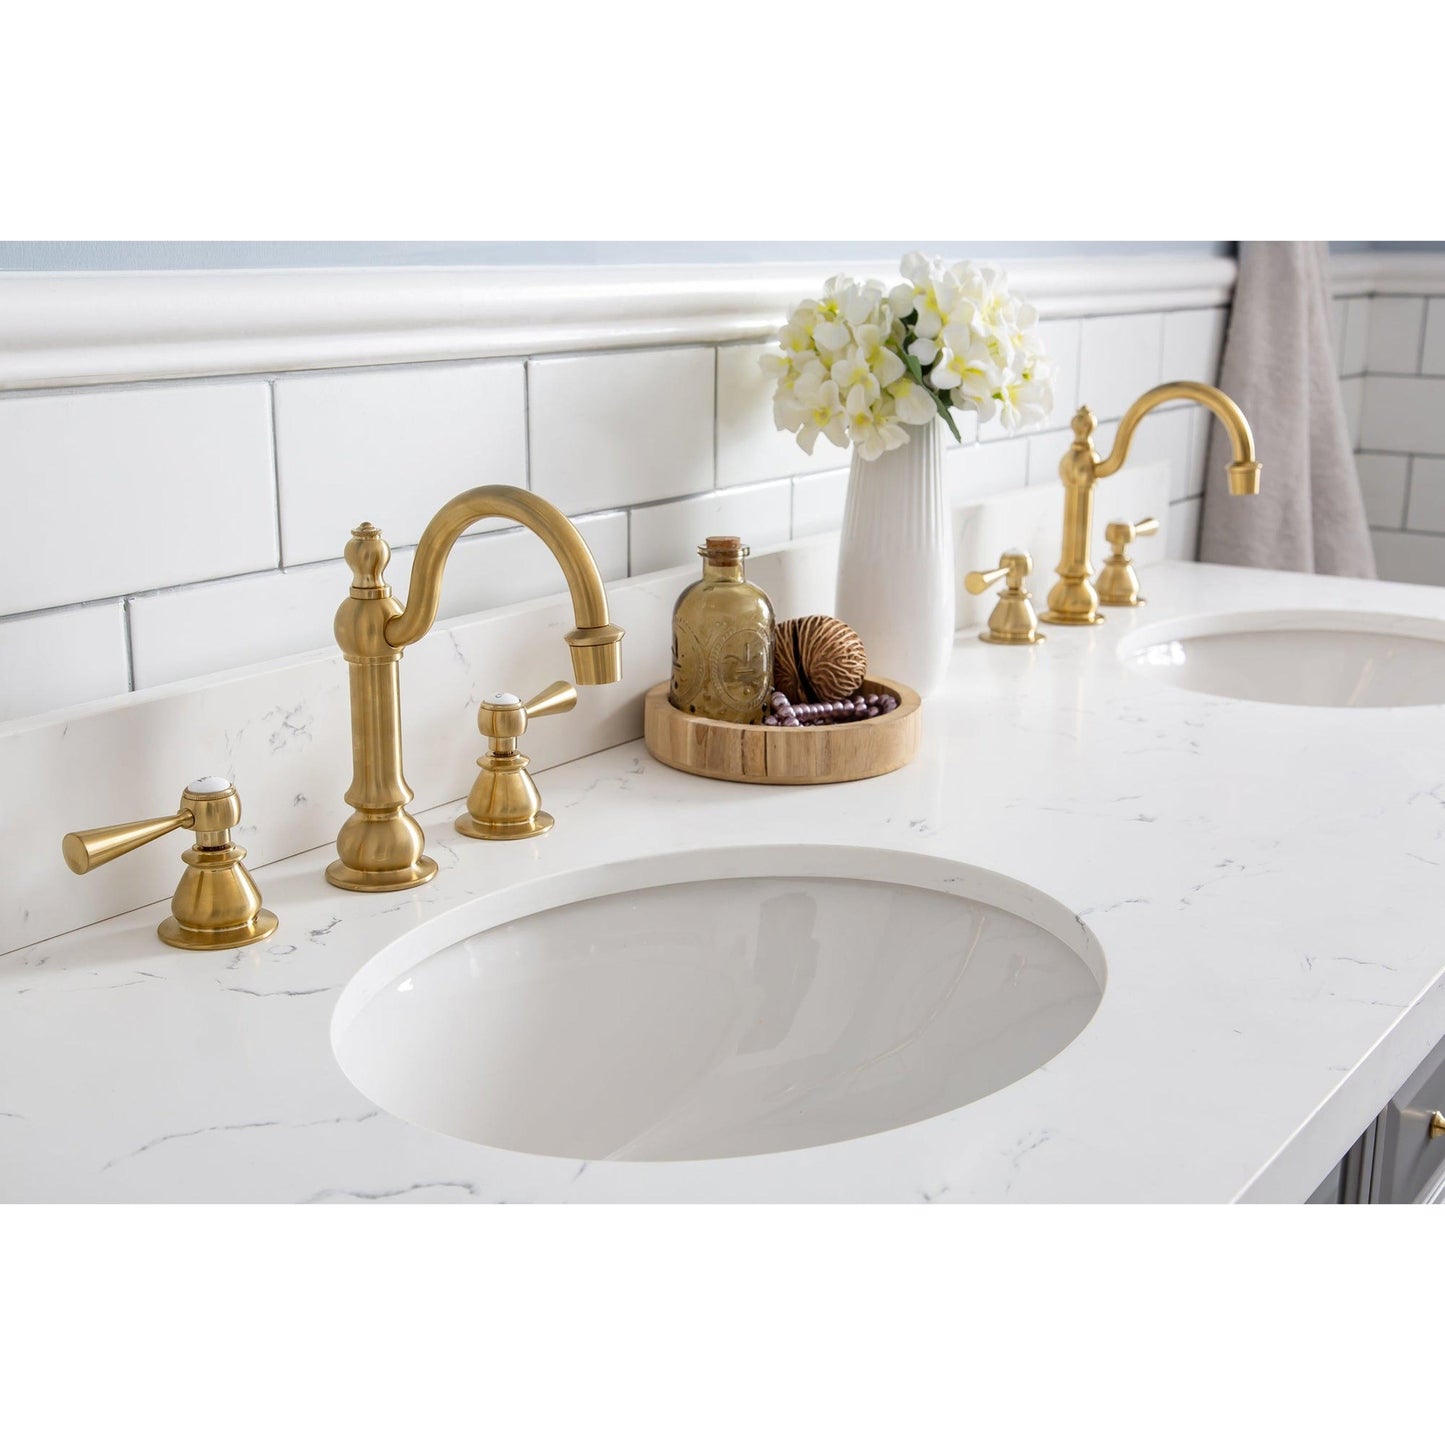 Water Creation Palace 60" Quartz Carrara Cashmere Grey Bathroom Vanity Set With Hardware, F2-0012 Faucets in Satin Gold Finish And Only Mirrors in Chrome Finish